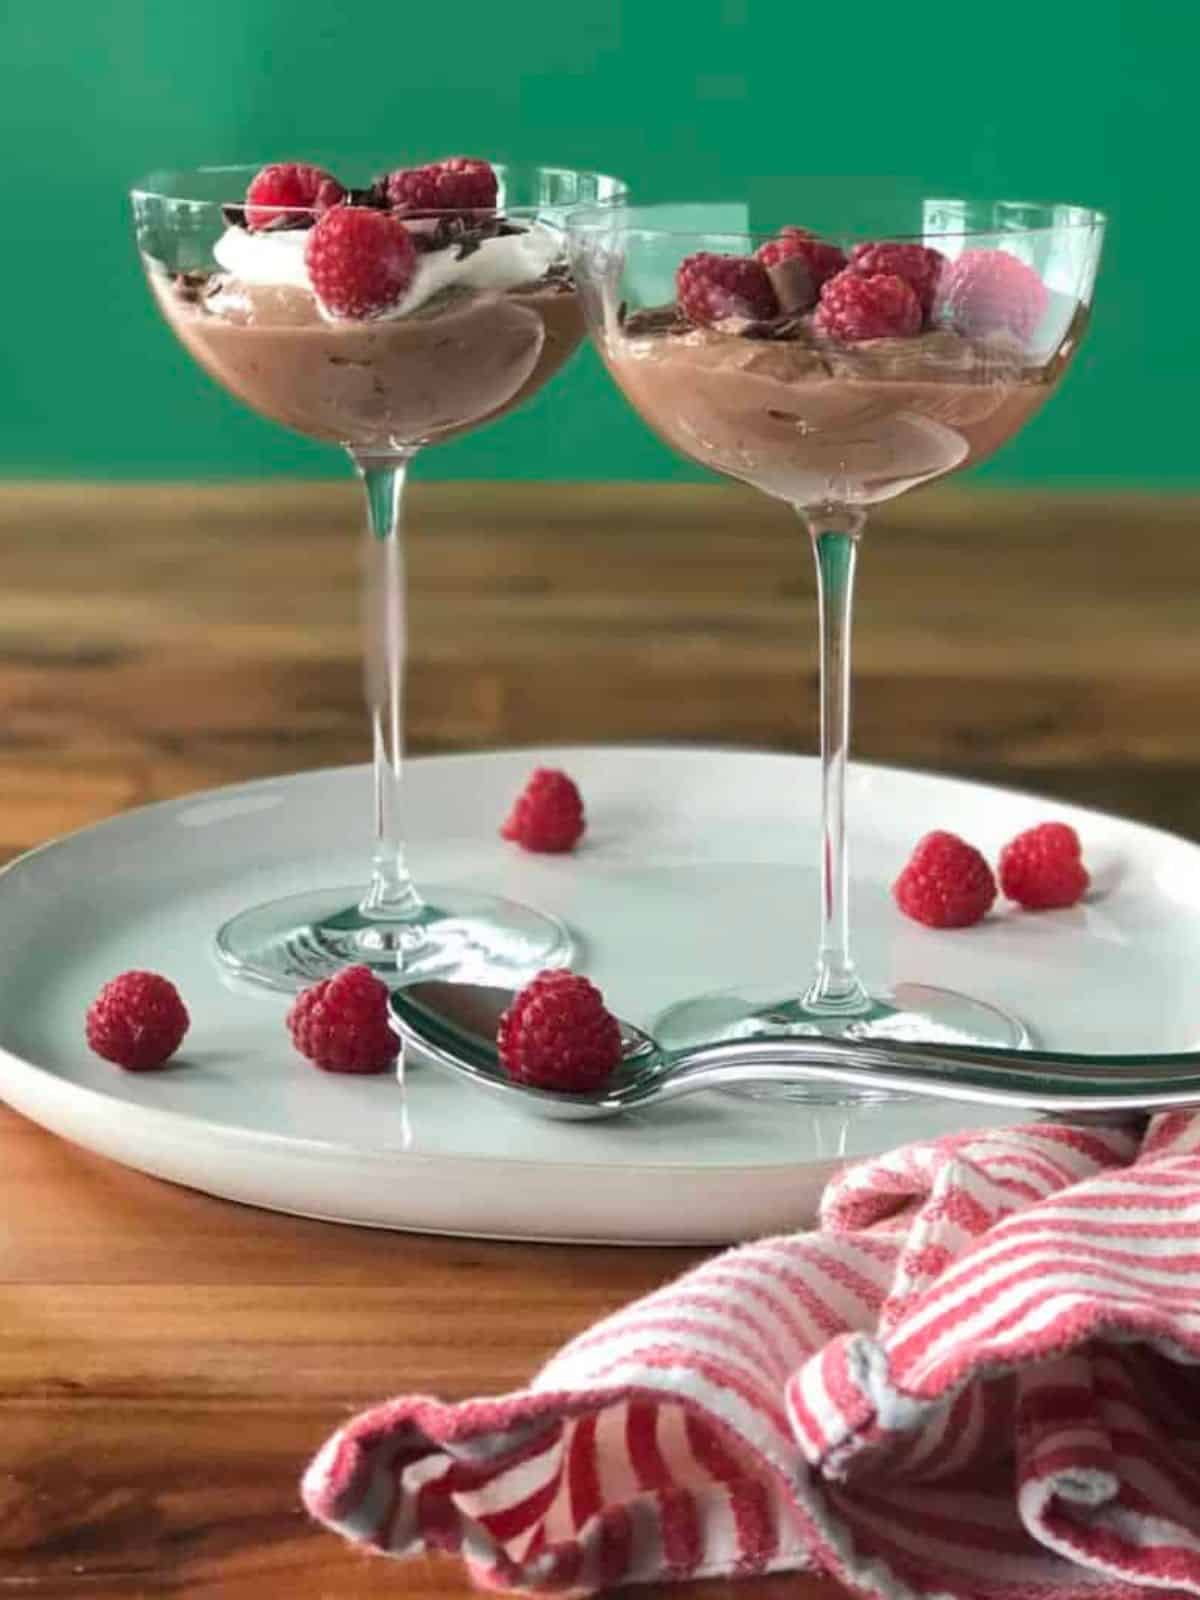 Rich and smooth Chocolate Ricotta Pudding topped with Raspberries in champagne saucers